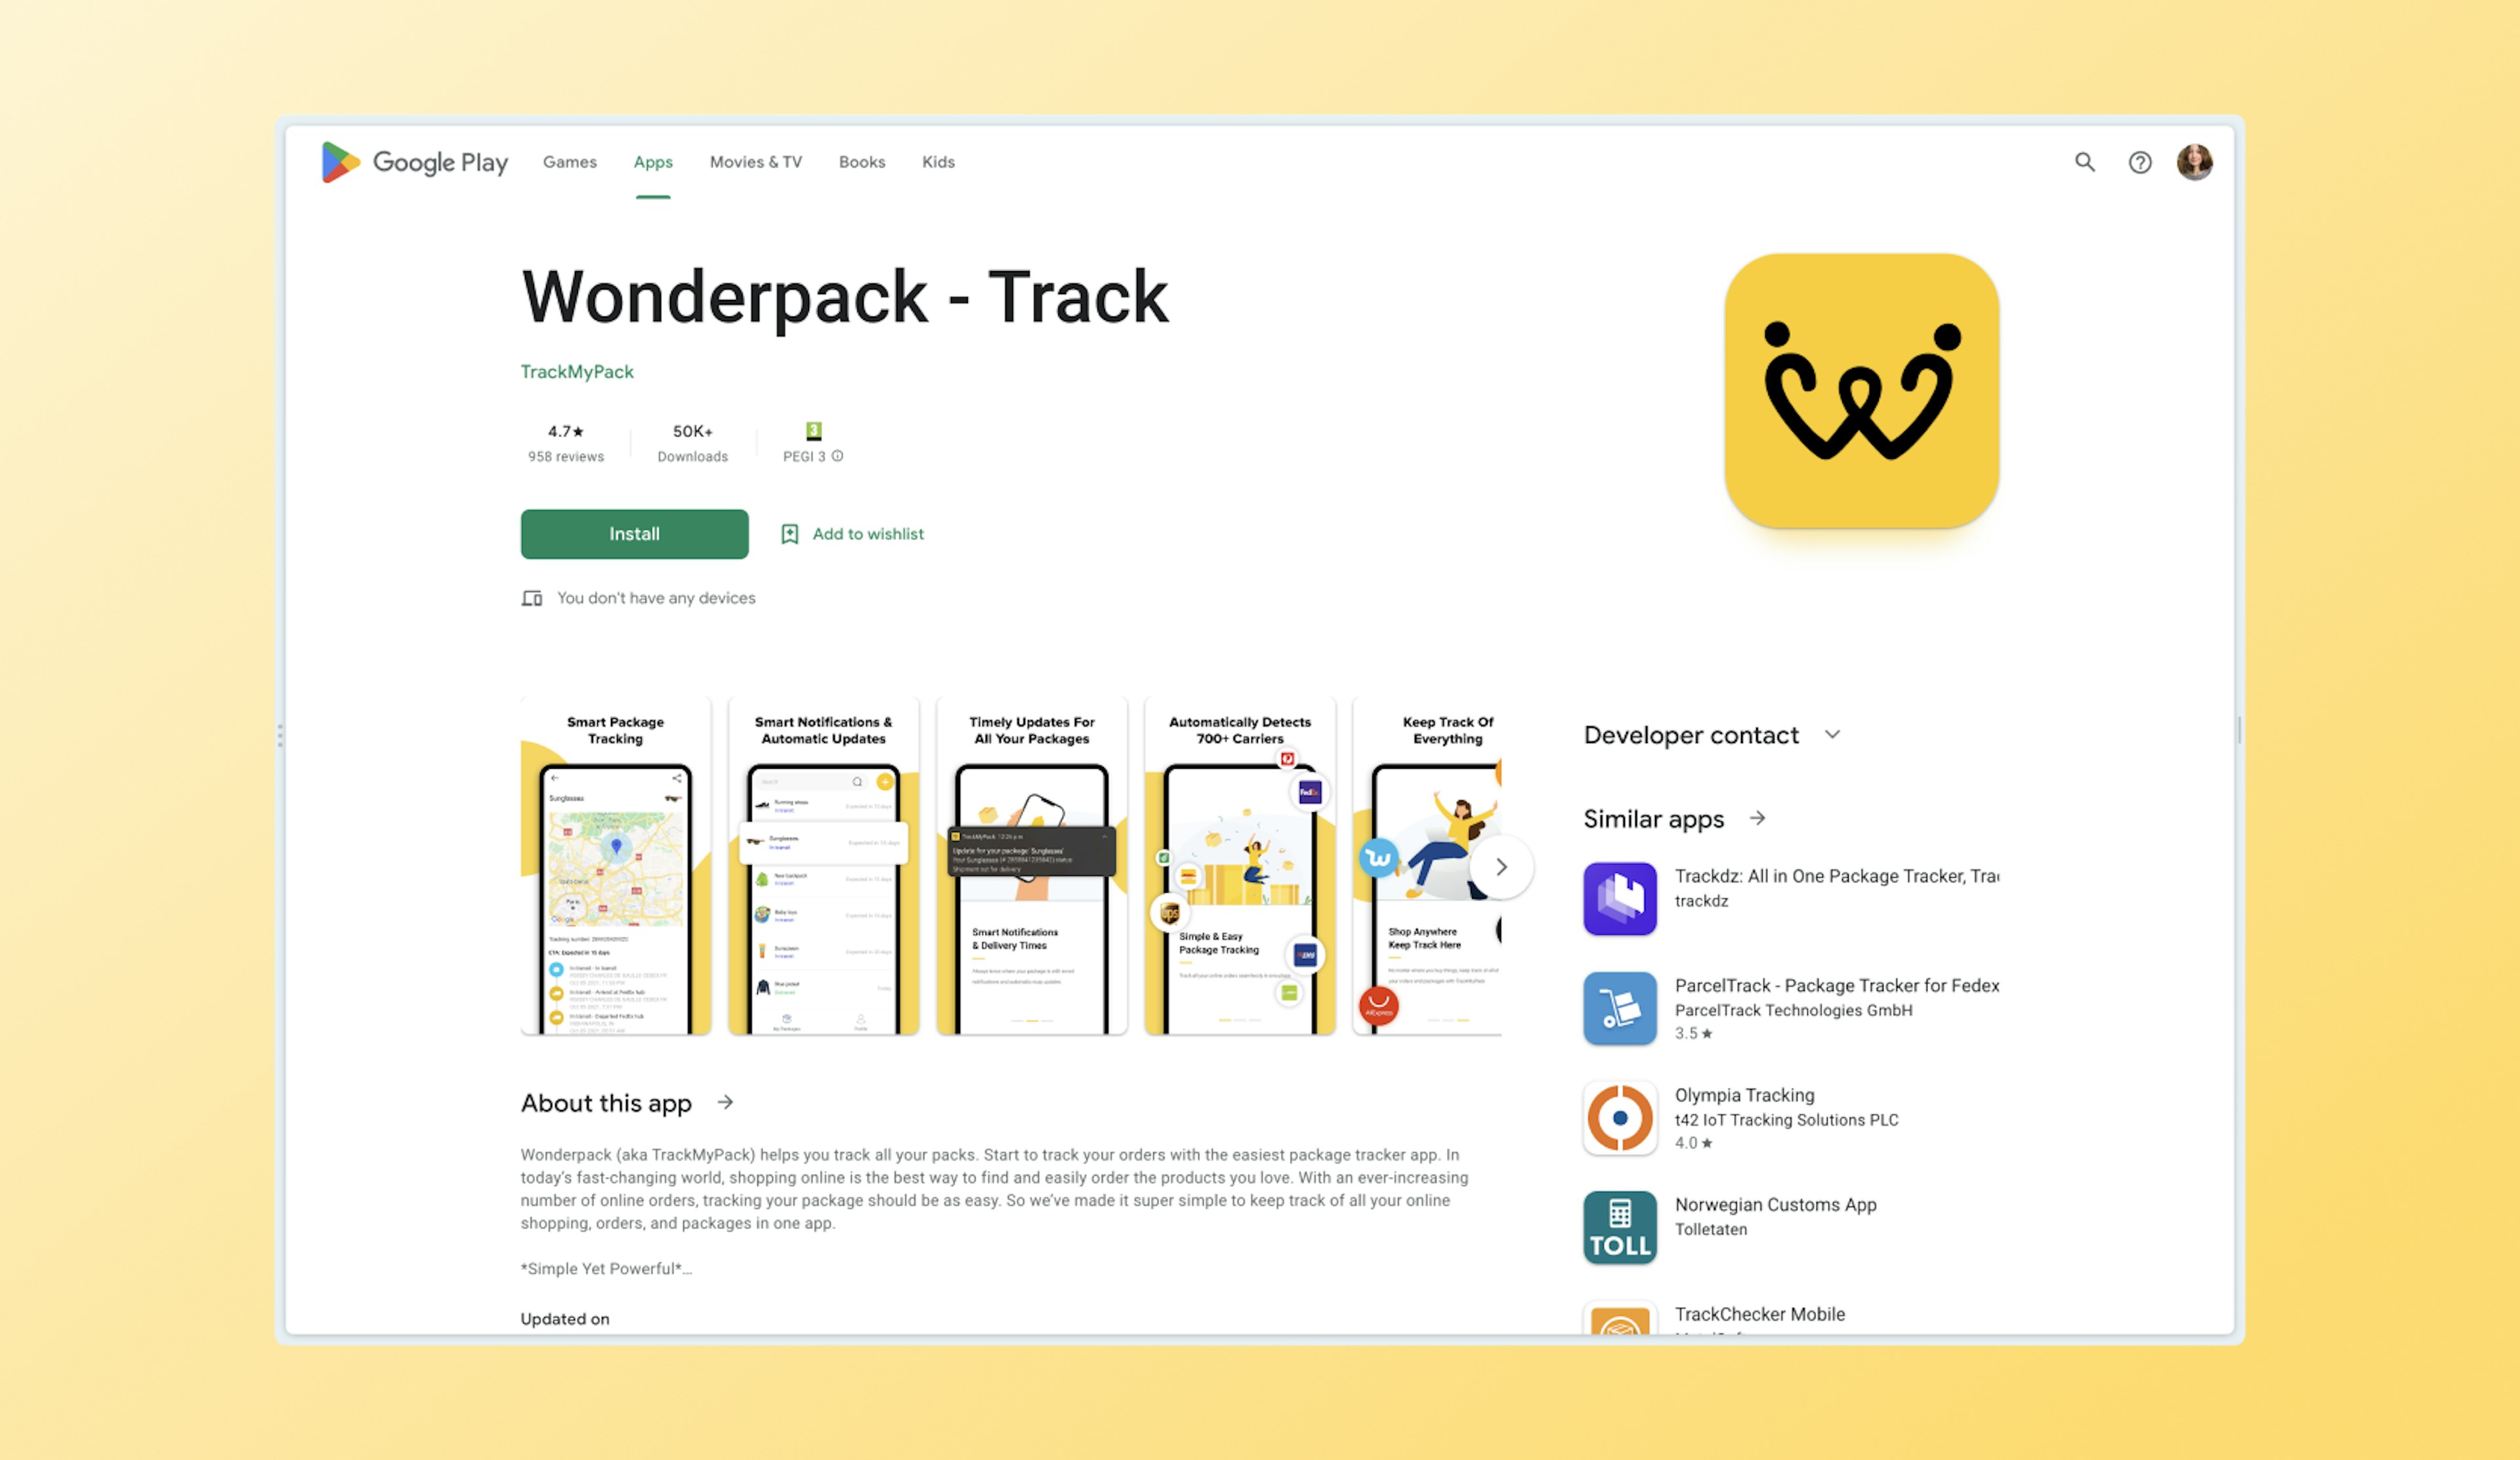 Google Playstore page for TrackMyPack